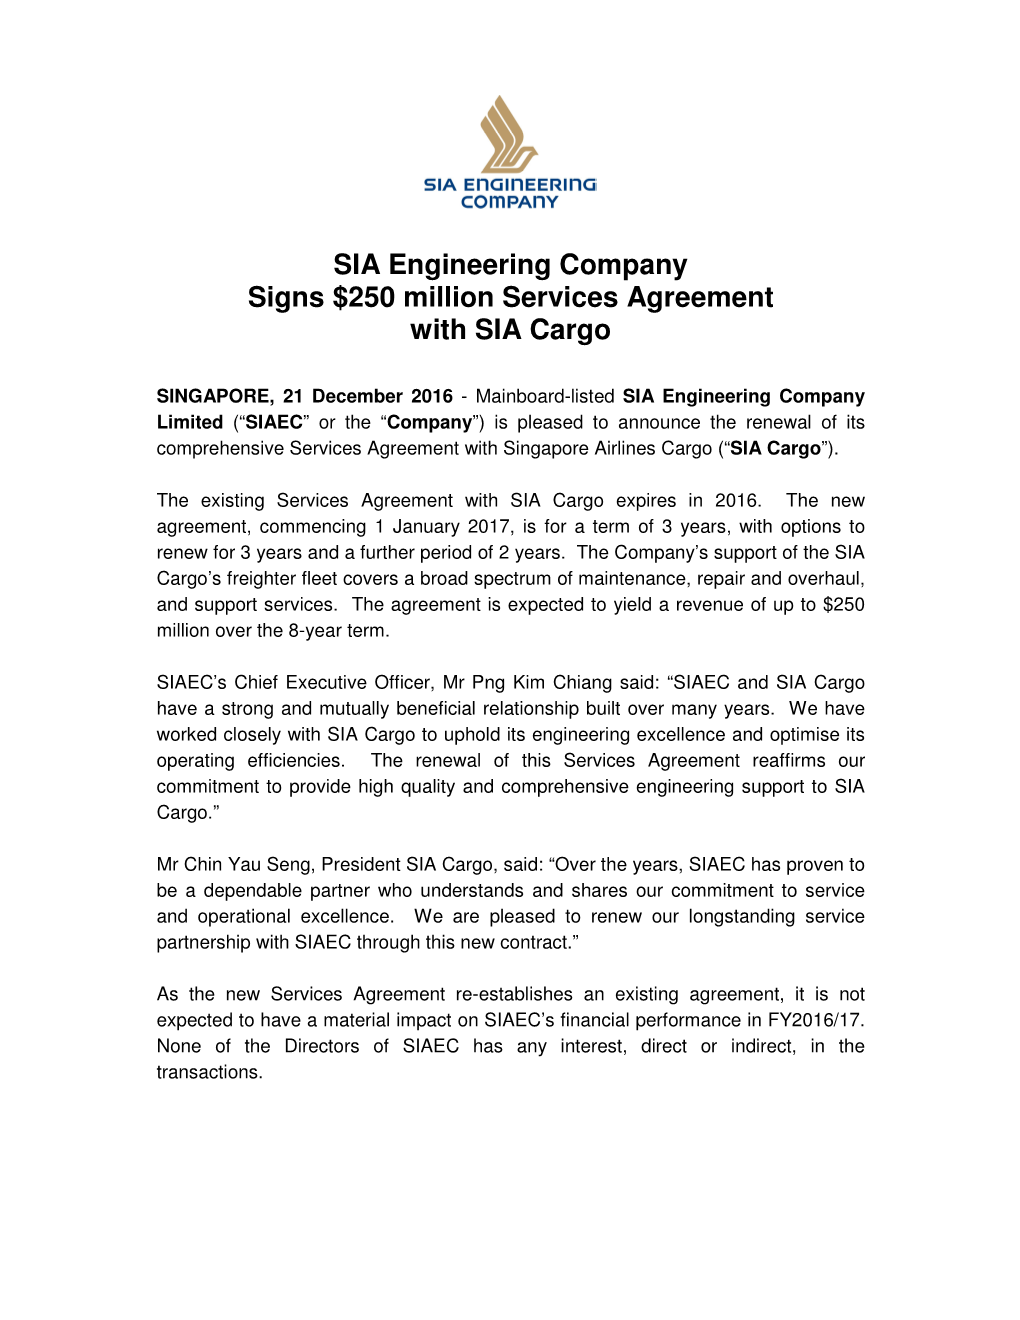 SIA Engineering Company Signs $250 Million Services Agreement with SIA Cargo